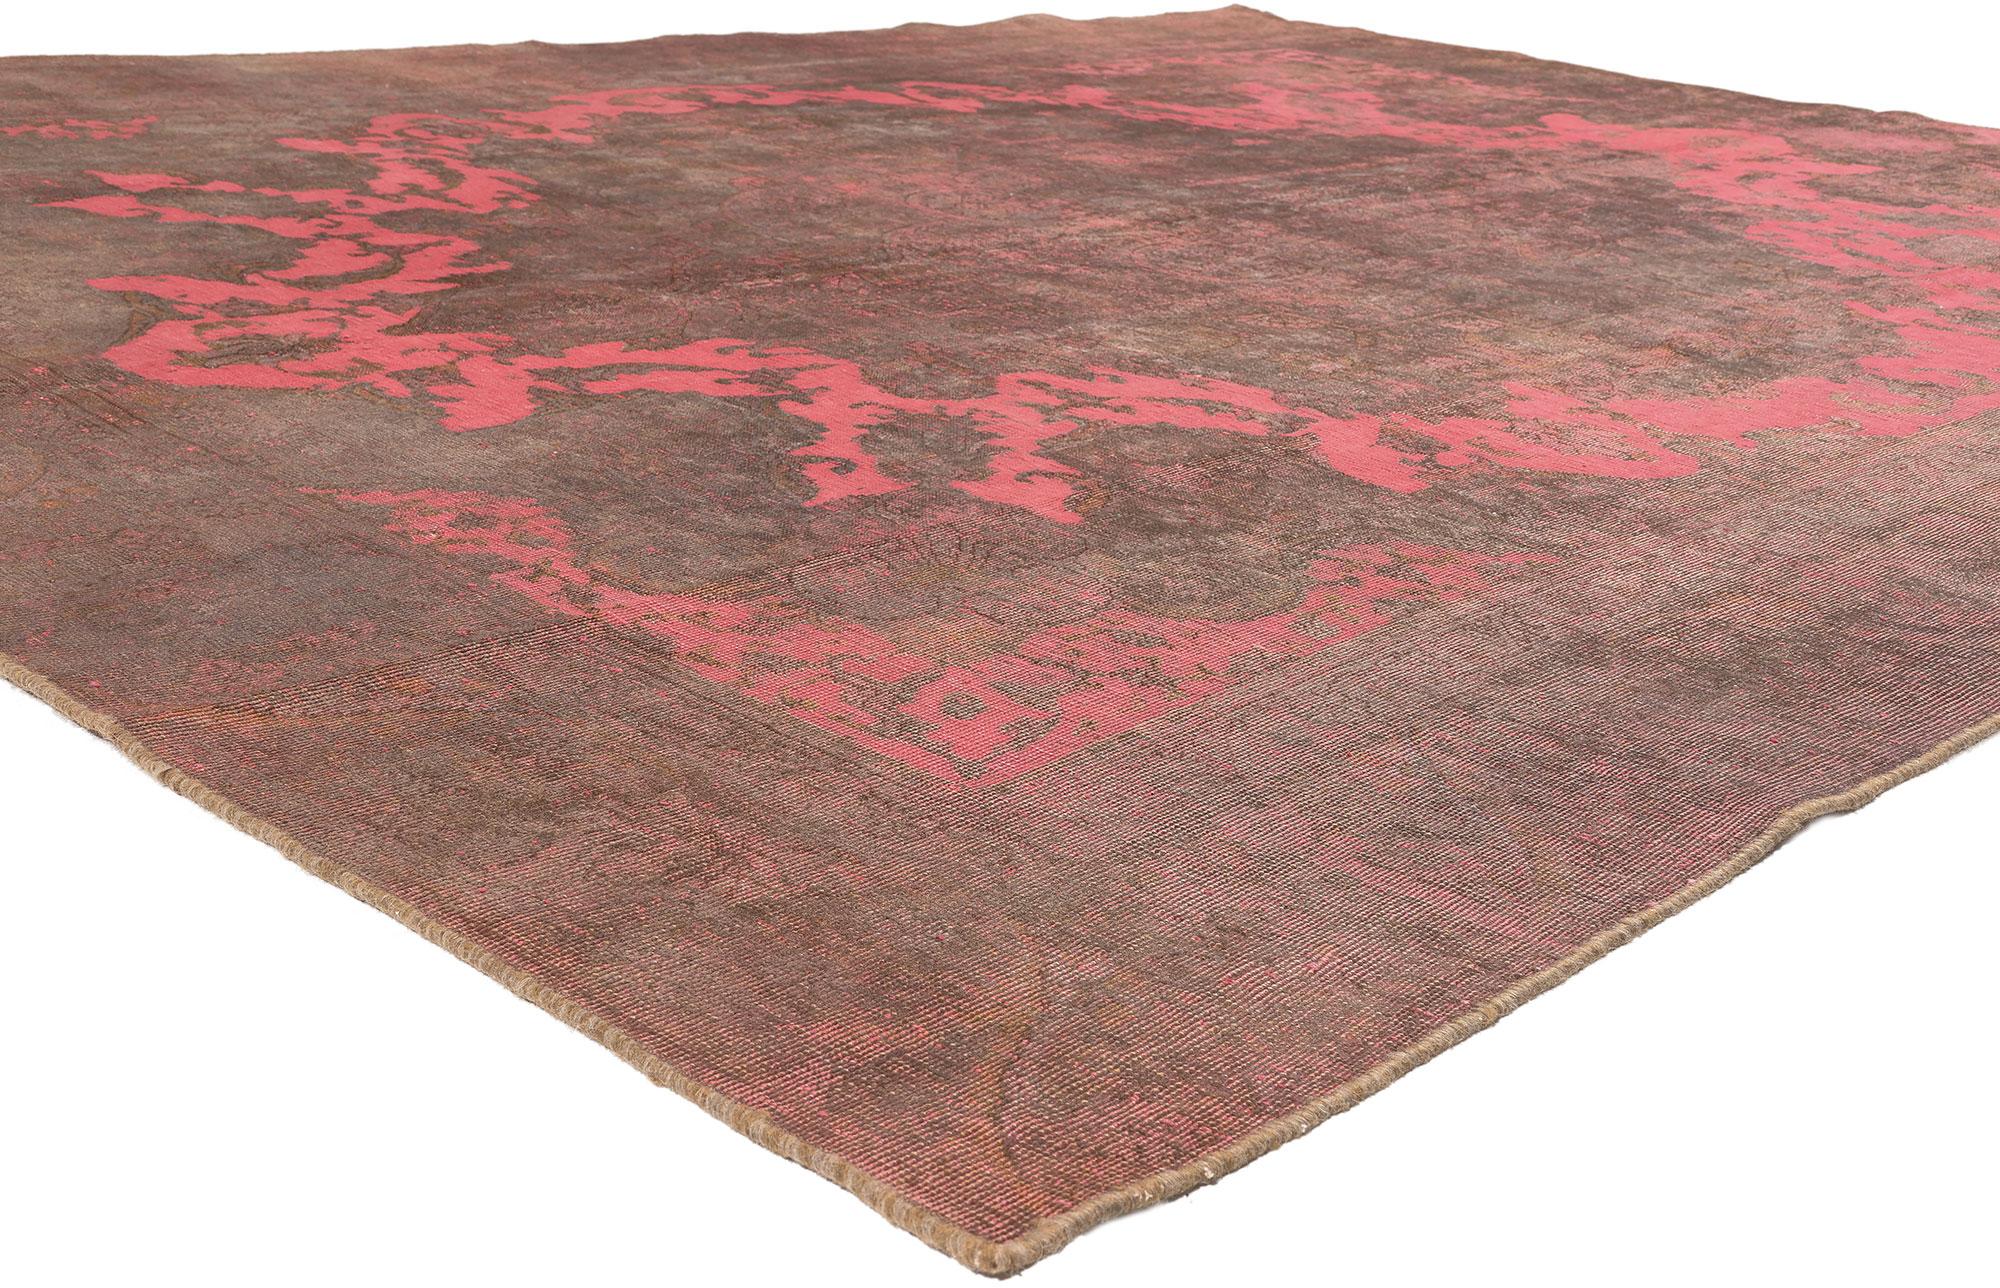 60767 Vintage Turkish Overdyed Rug, 09’02 x 12’03. 
​Get ready to embark on a design adventure where Modern Industrial locks horns with Maximalist Bohemian in this hand-knotted wool vintage Turkish overdyed rug. It's like a design manifesto with a